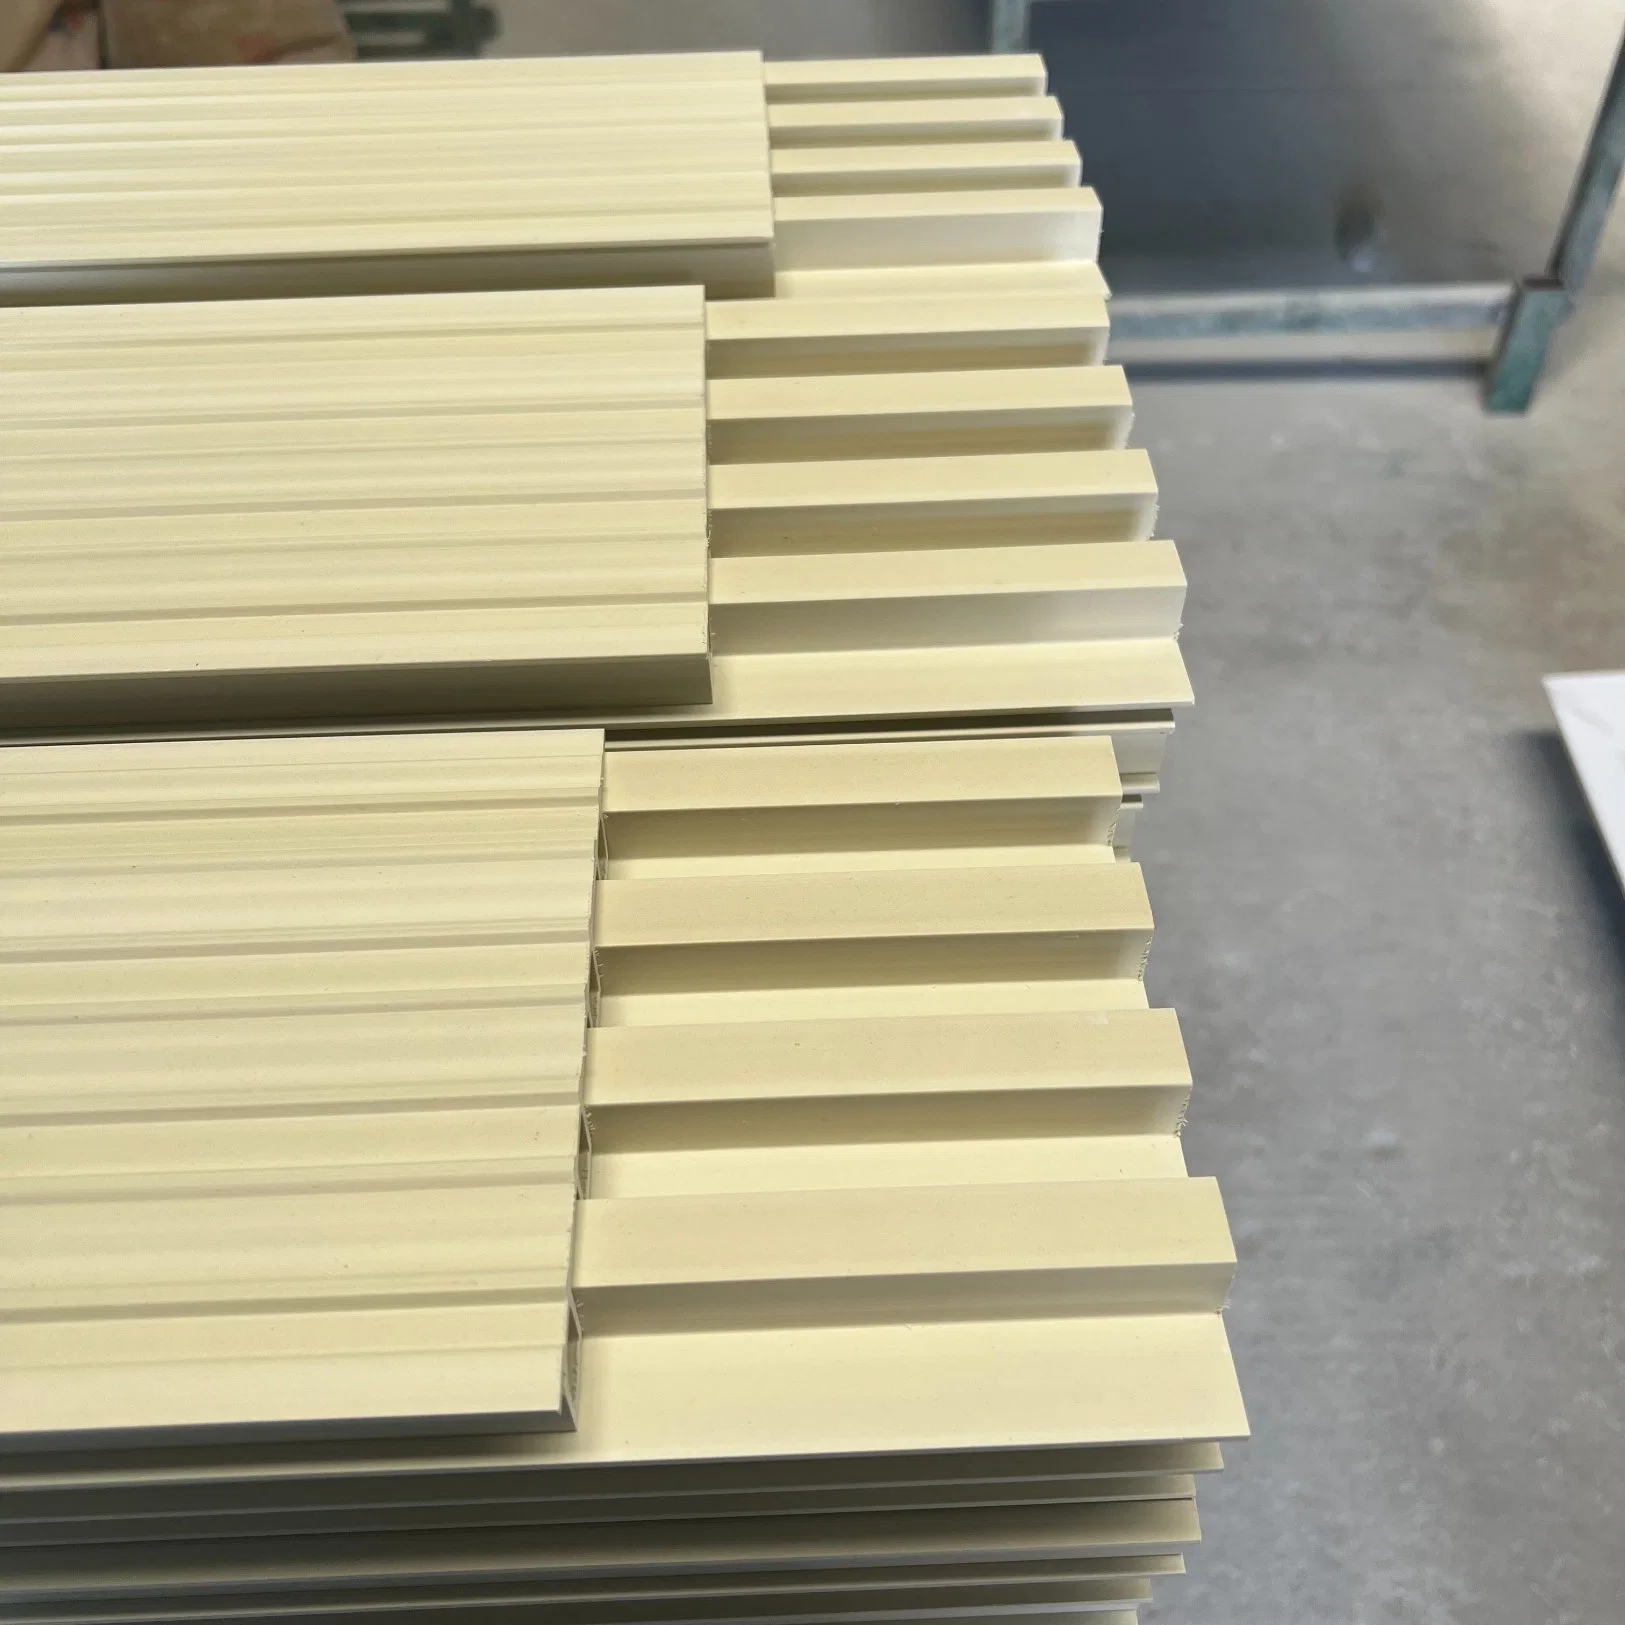 3D Fluted Cladding PVC WPC Wall Panel Interior Plastic Wooden Composite Covering Board Wainscoting Vinyl Timber Decorativo